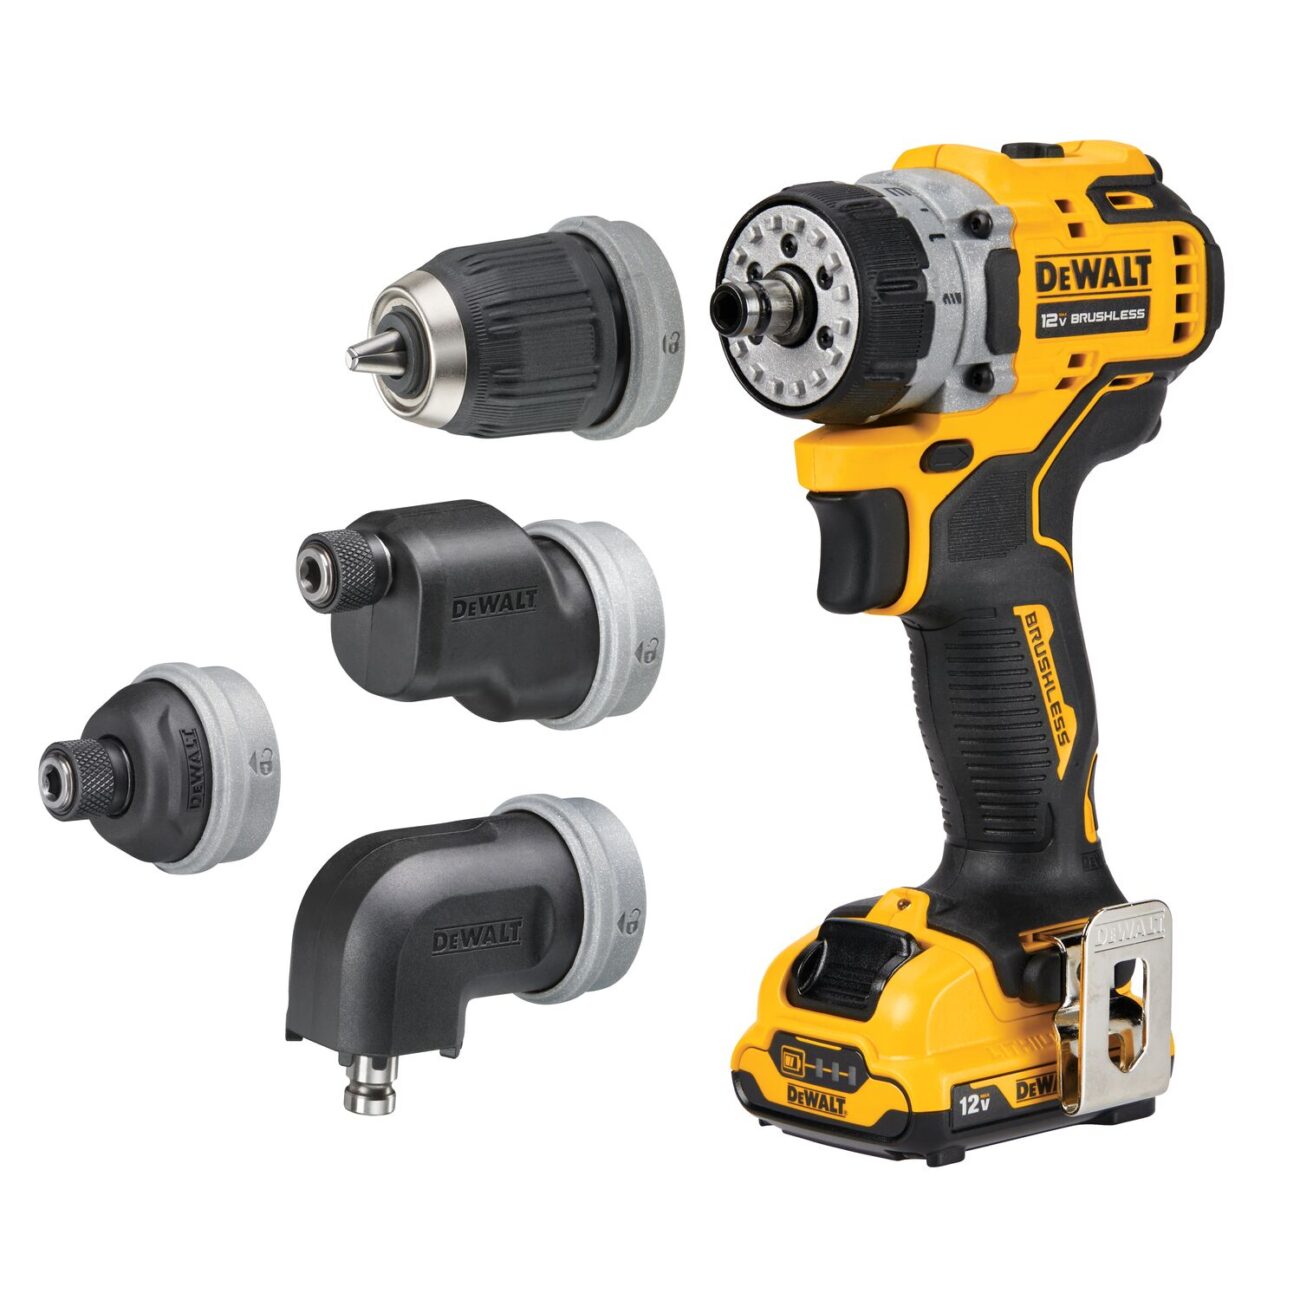 The 12V MAX 5-in-1 Drill/Driver is pictured with its four interchangeable attachments. 